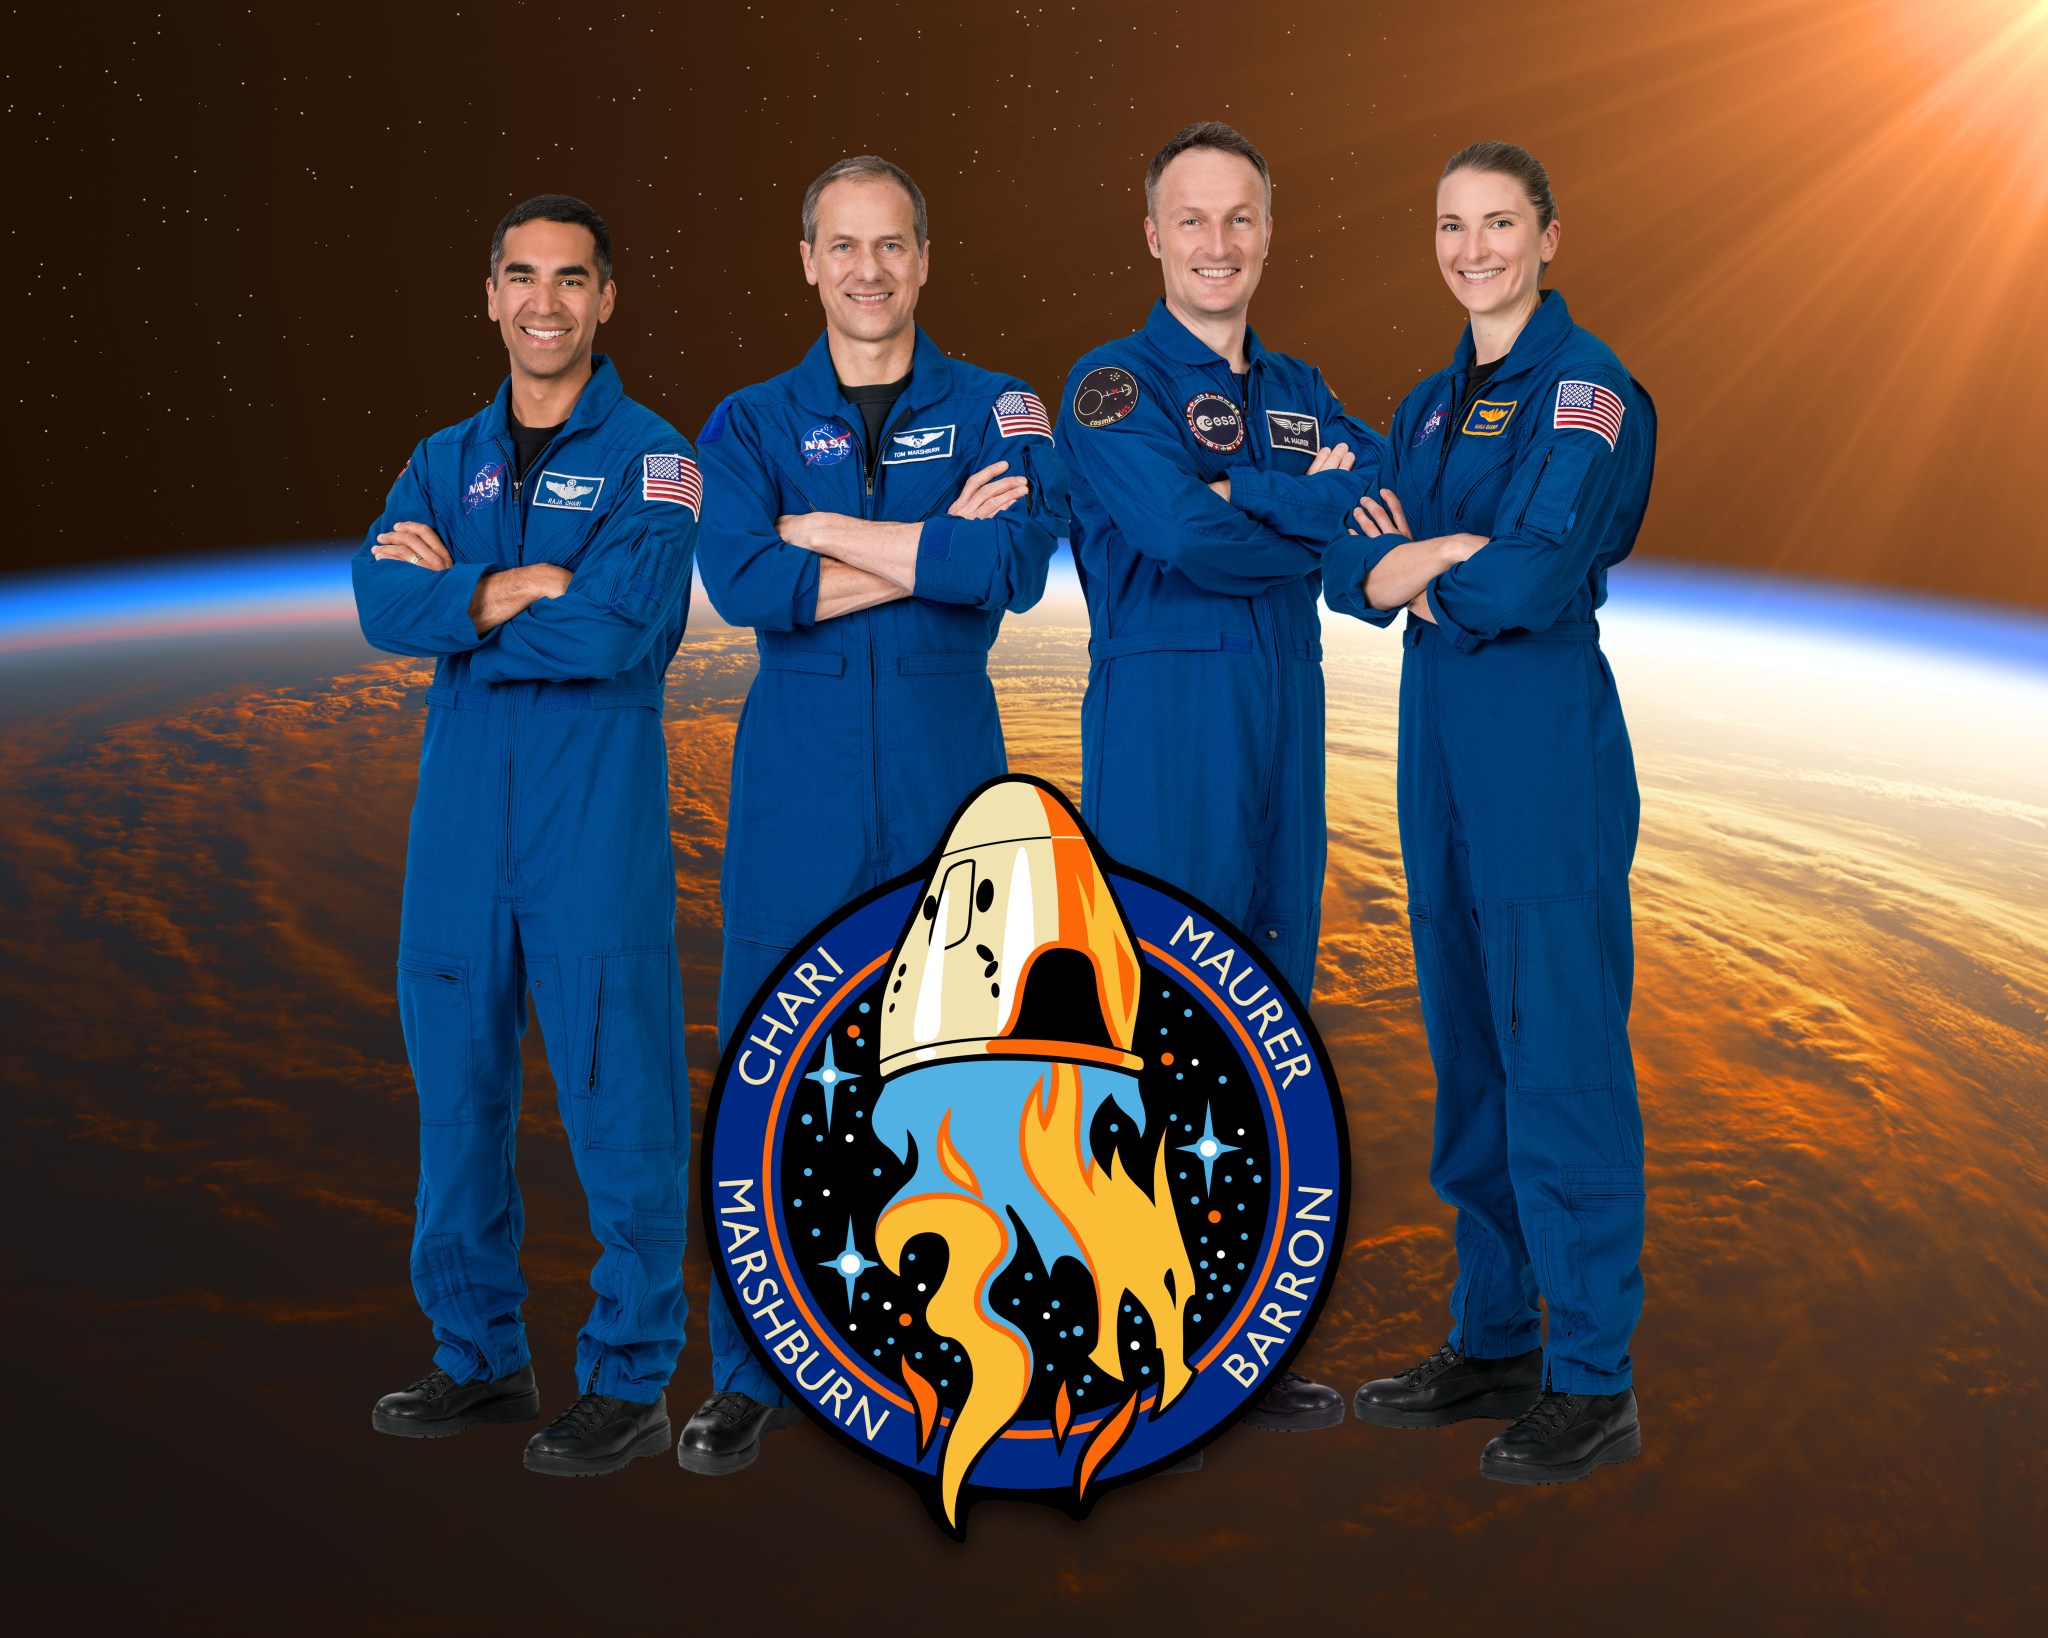 Official crew portrait of the SpaceX Crew-3 mission